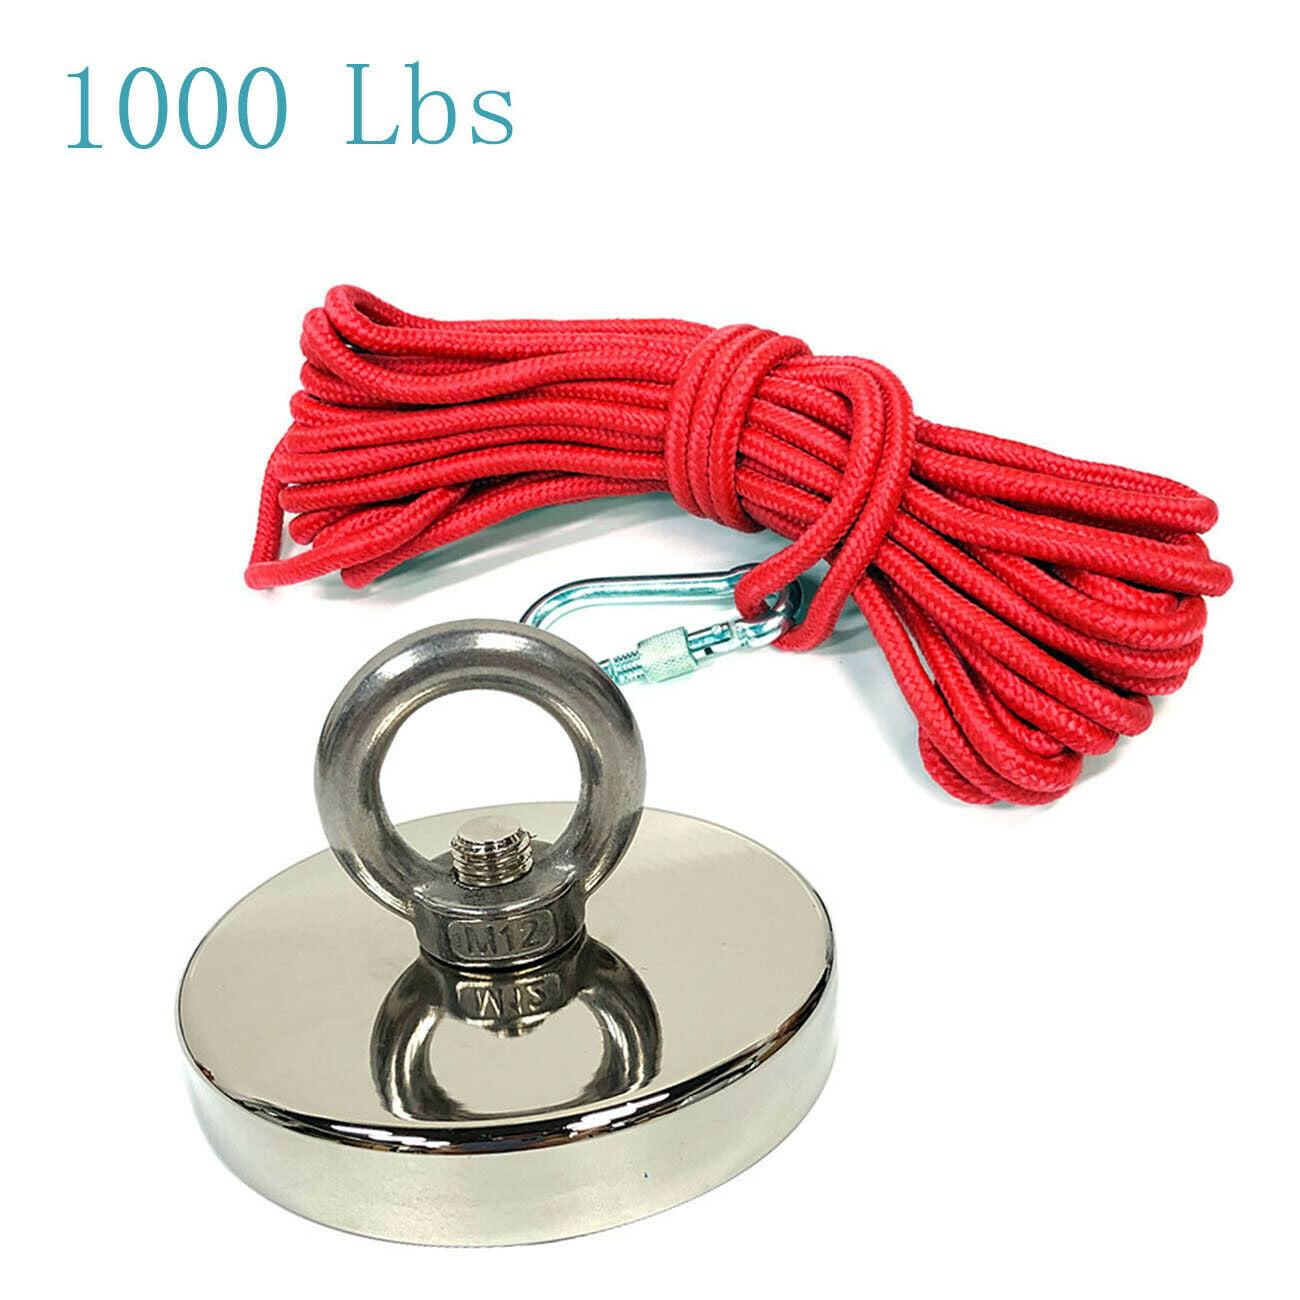 Rope Carabiner Details about   1000LBS Fishing Magnet Strong Neodymium Pull Force Treasure Hunt